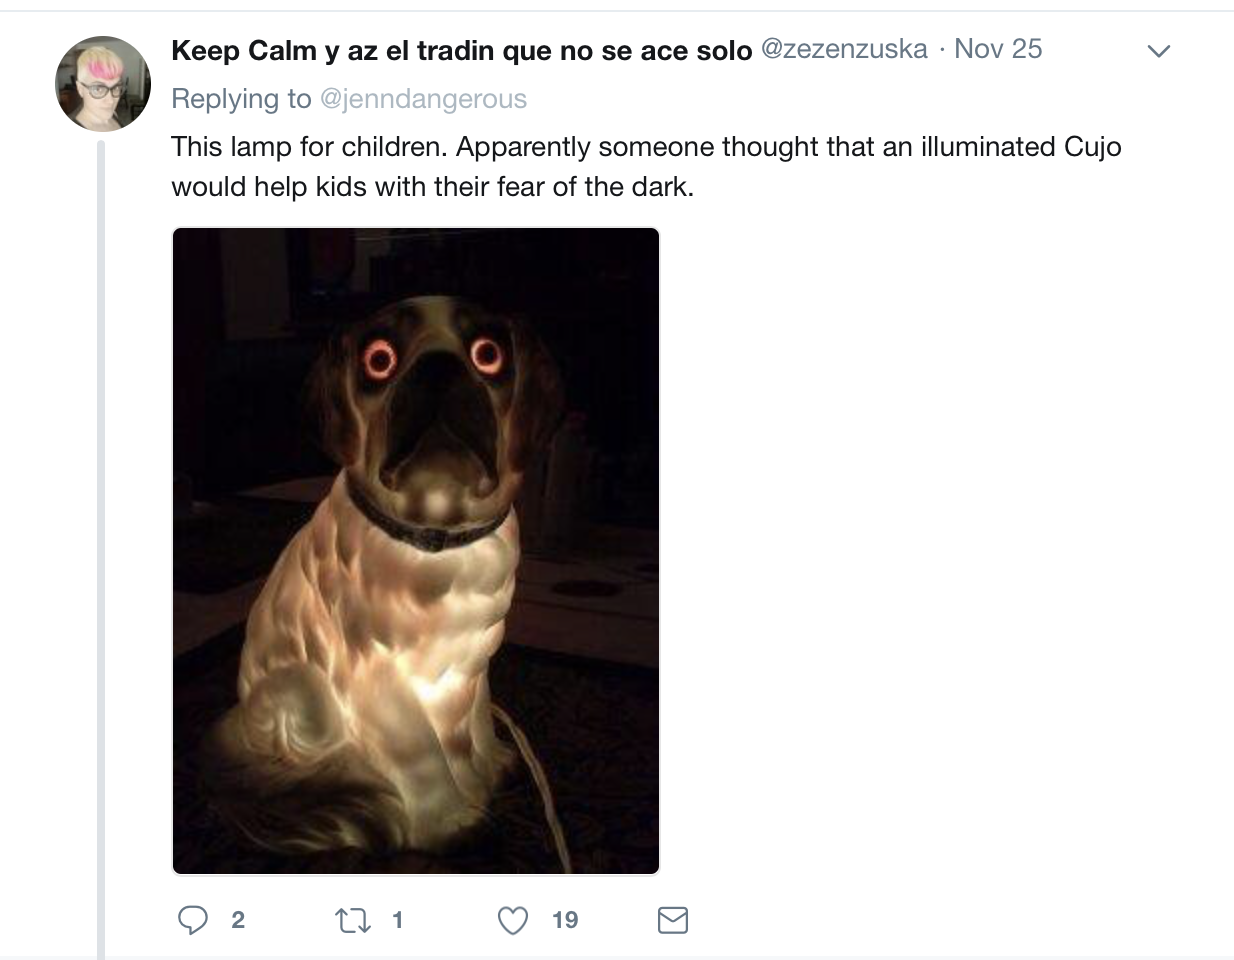 dog - Keep Calm y az el tradin que no se ace solo Nov 25 This lamp for children. Apparently someone thought that an illuminated Cujo would help kids with their fear of the dark. 2 2 1 19